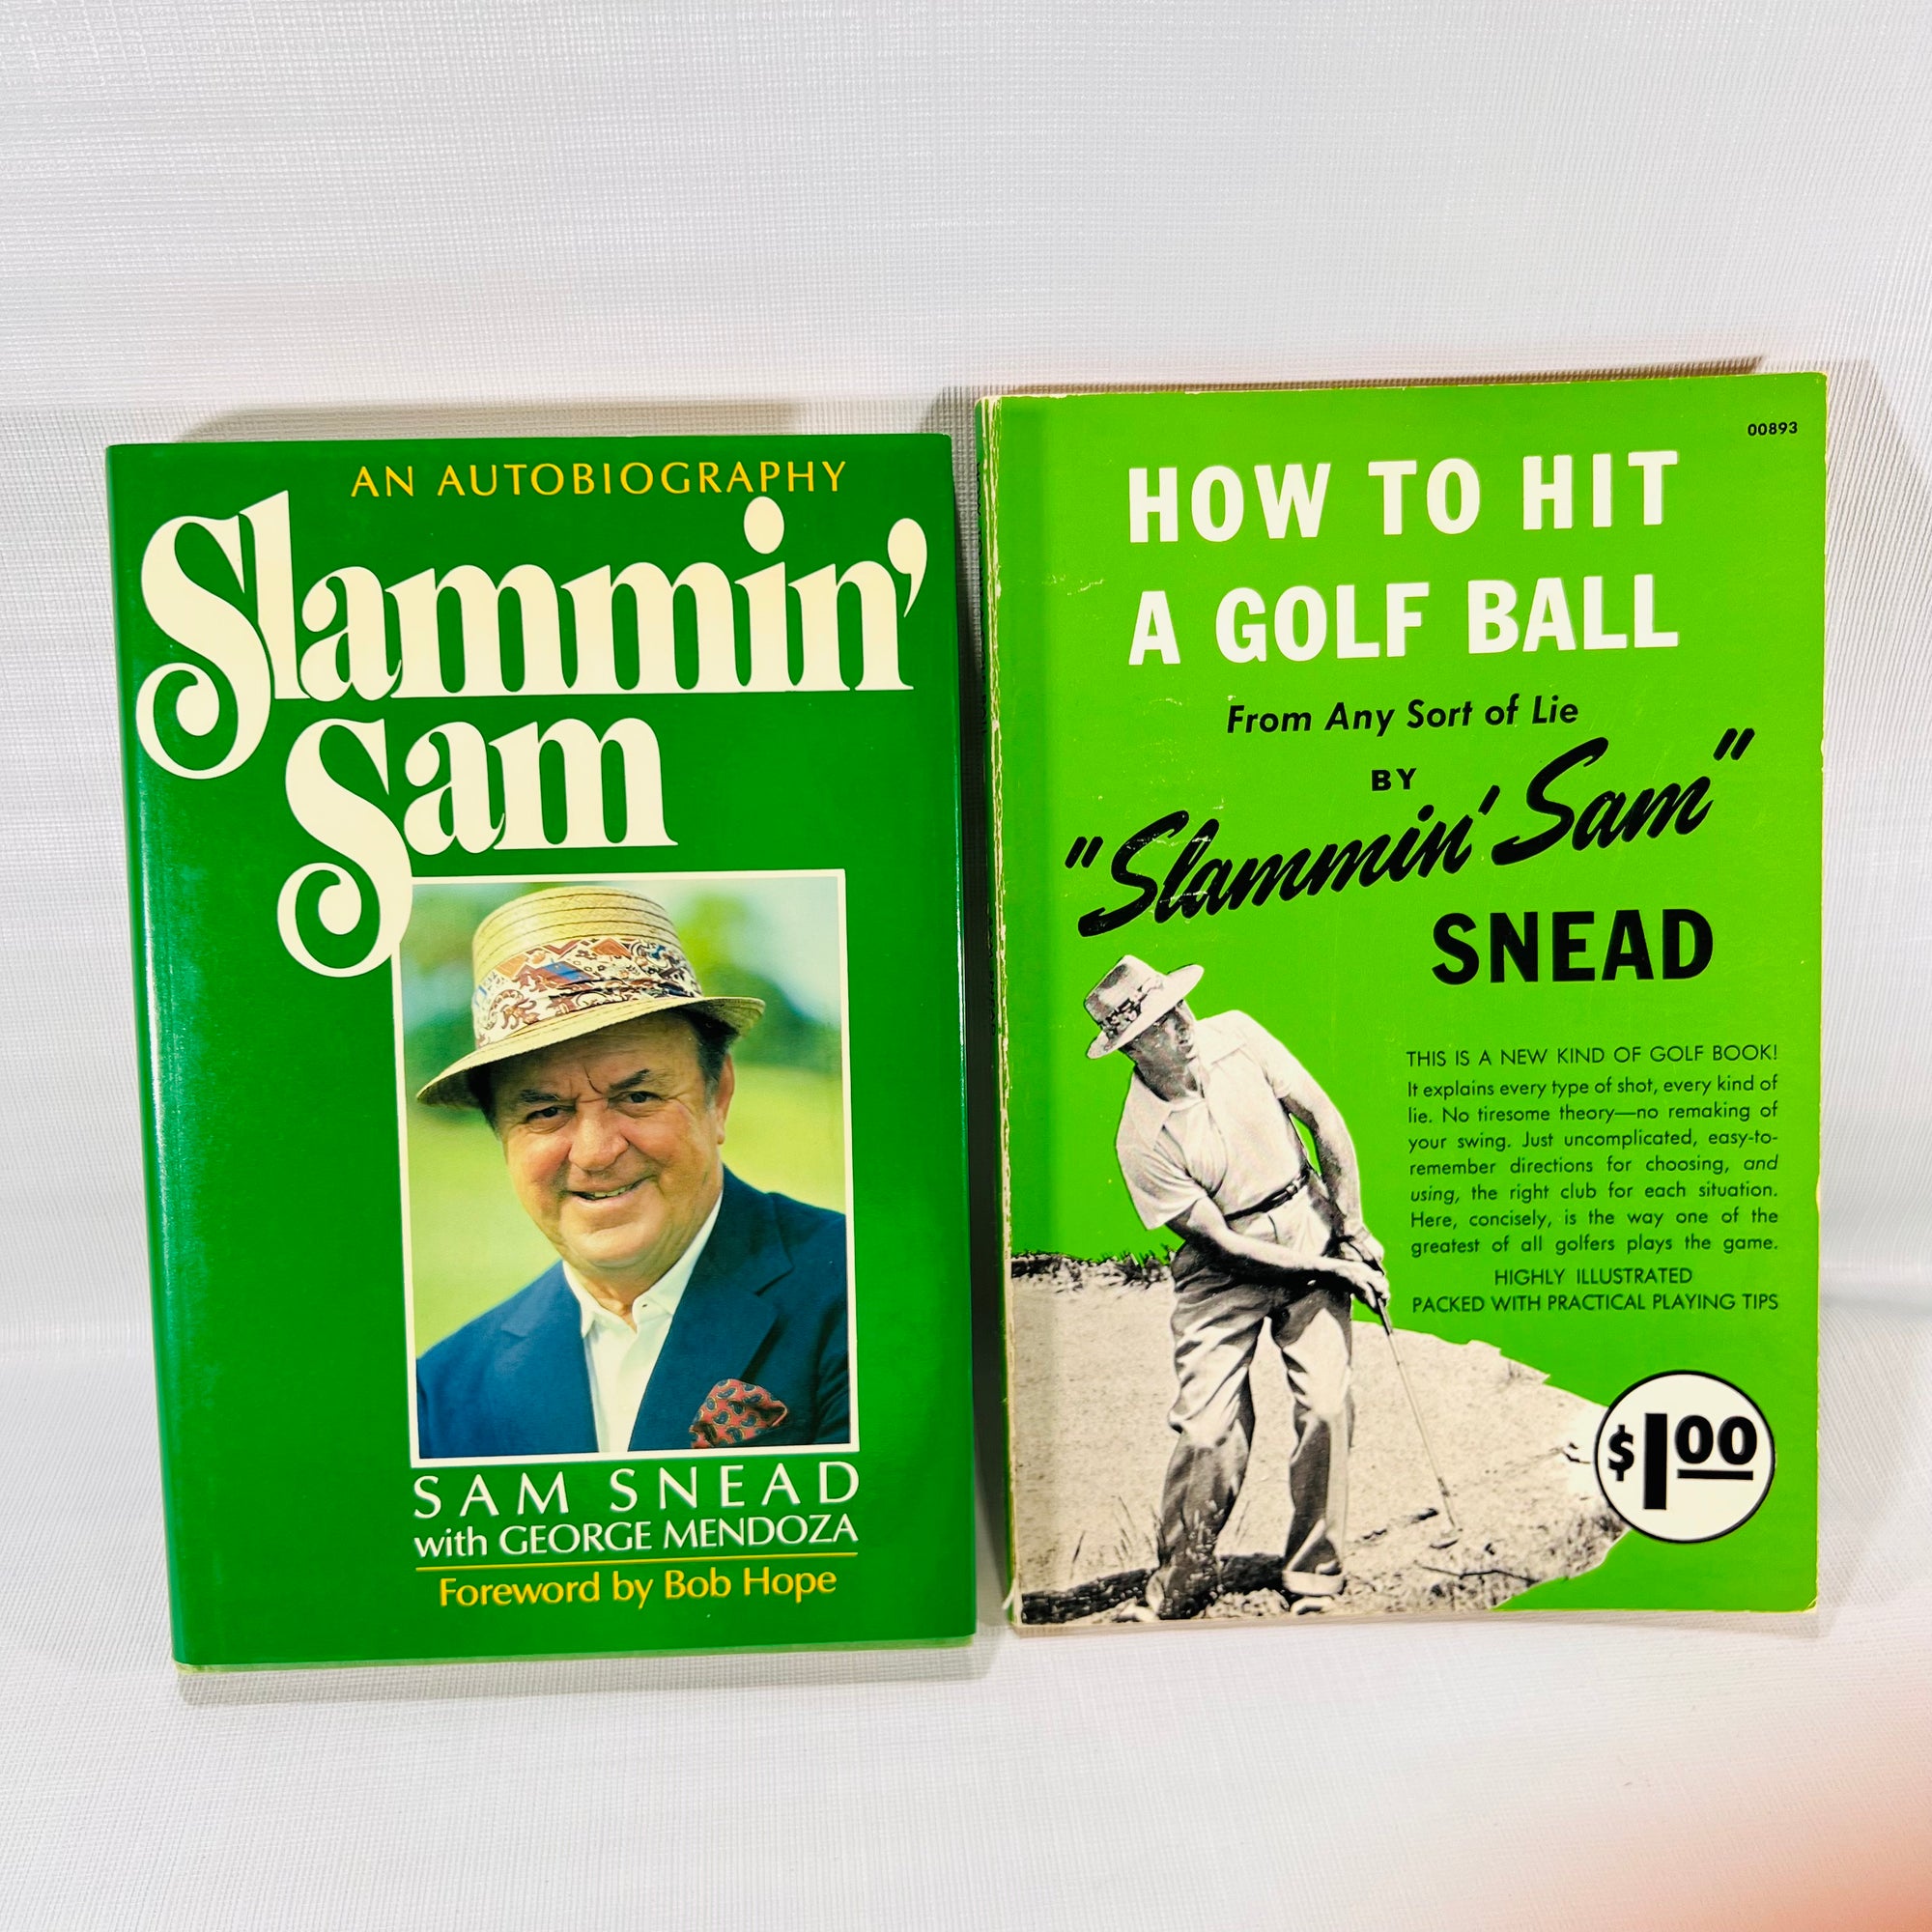 Slammin' Sam an Autobiography 1986Donald I Find Inc and How to Hit a Golf Ball 1950 Garden City Books